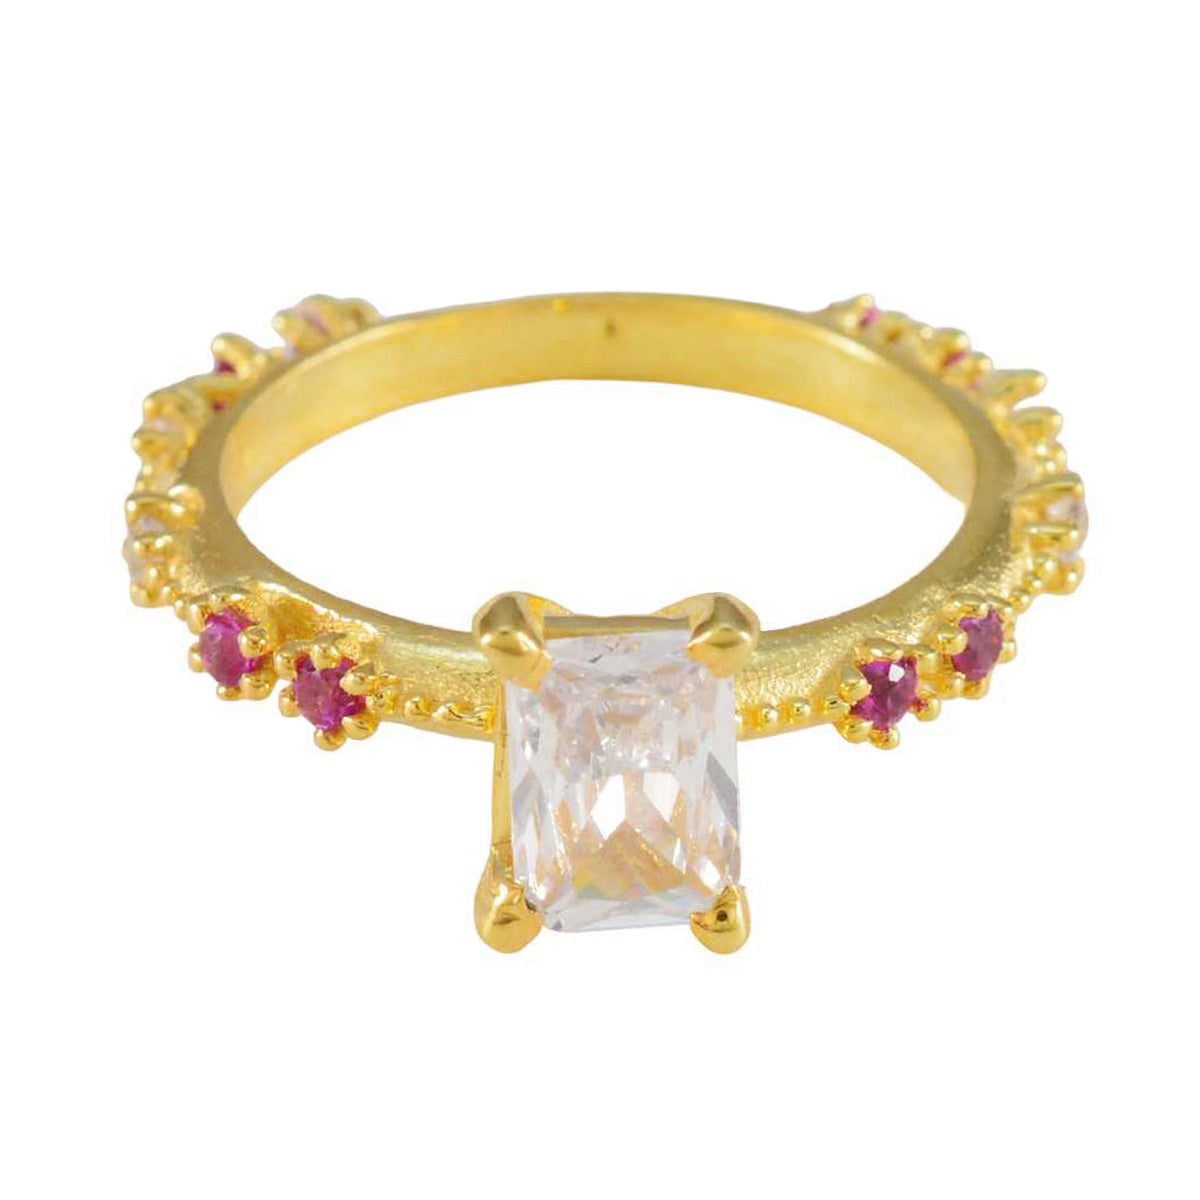 Riyo Adorable Silver Ring With Yellow Gold Plating Ruby CZ Stone Octagon Shape Prong Setting Handamde Jewelry New Year Ring